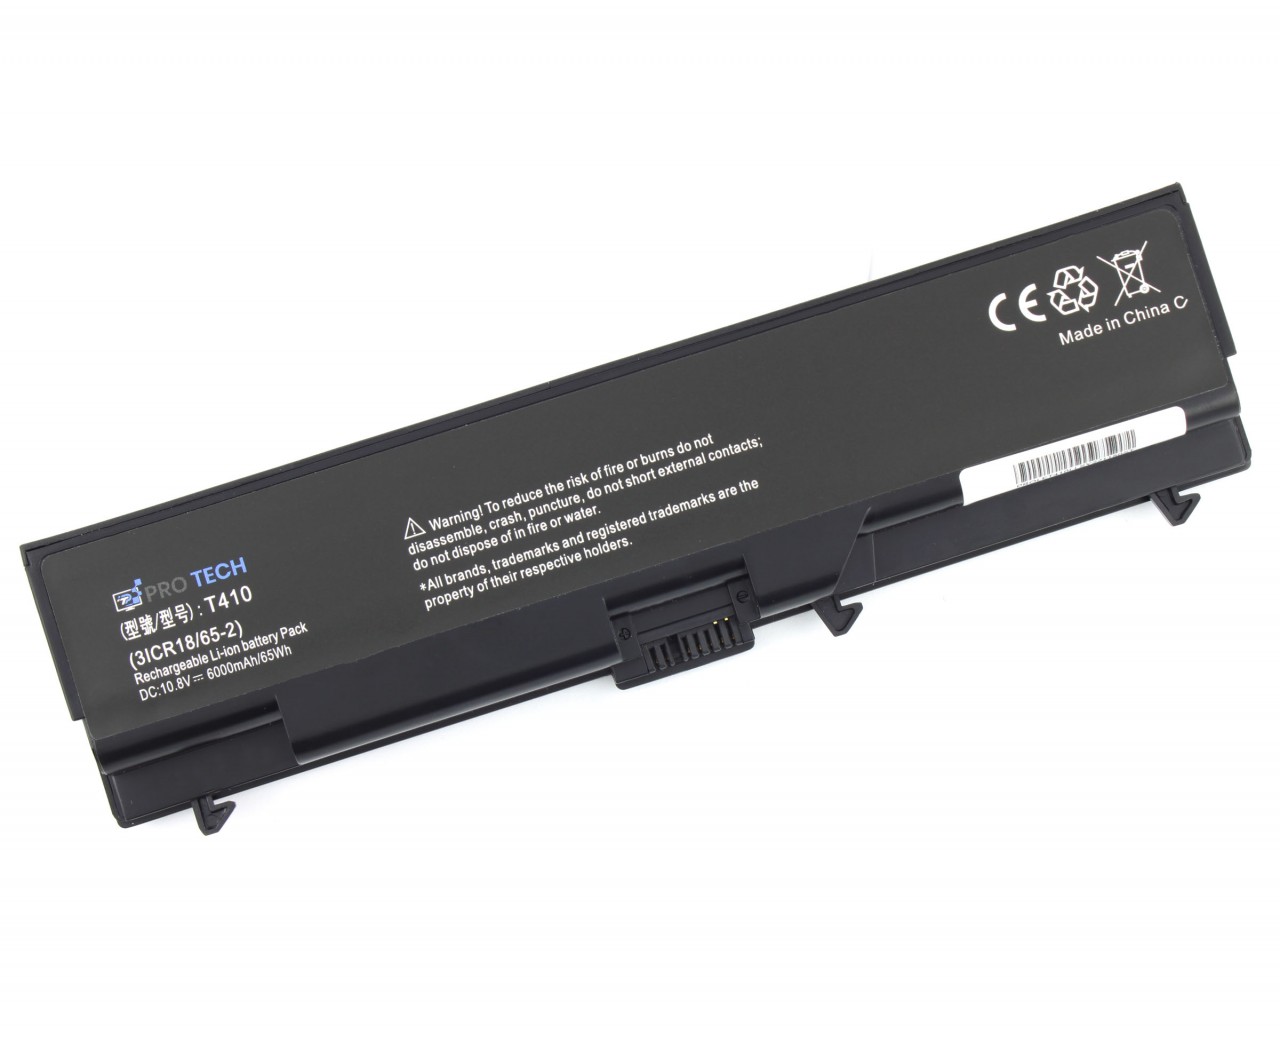 Baterie Lenovo ThinkPad E425 65Wh 6000mAH Protech High Quality Replacement